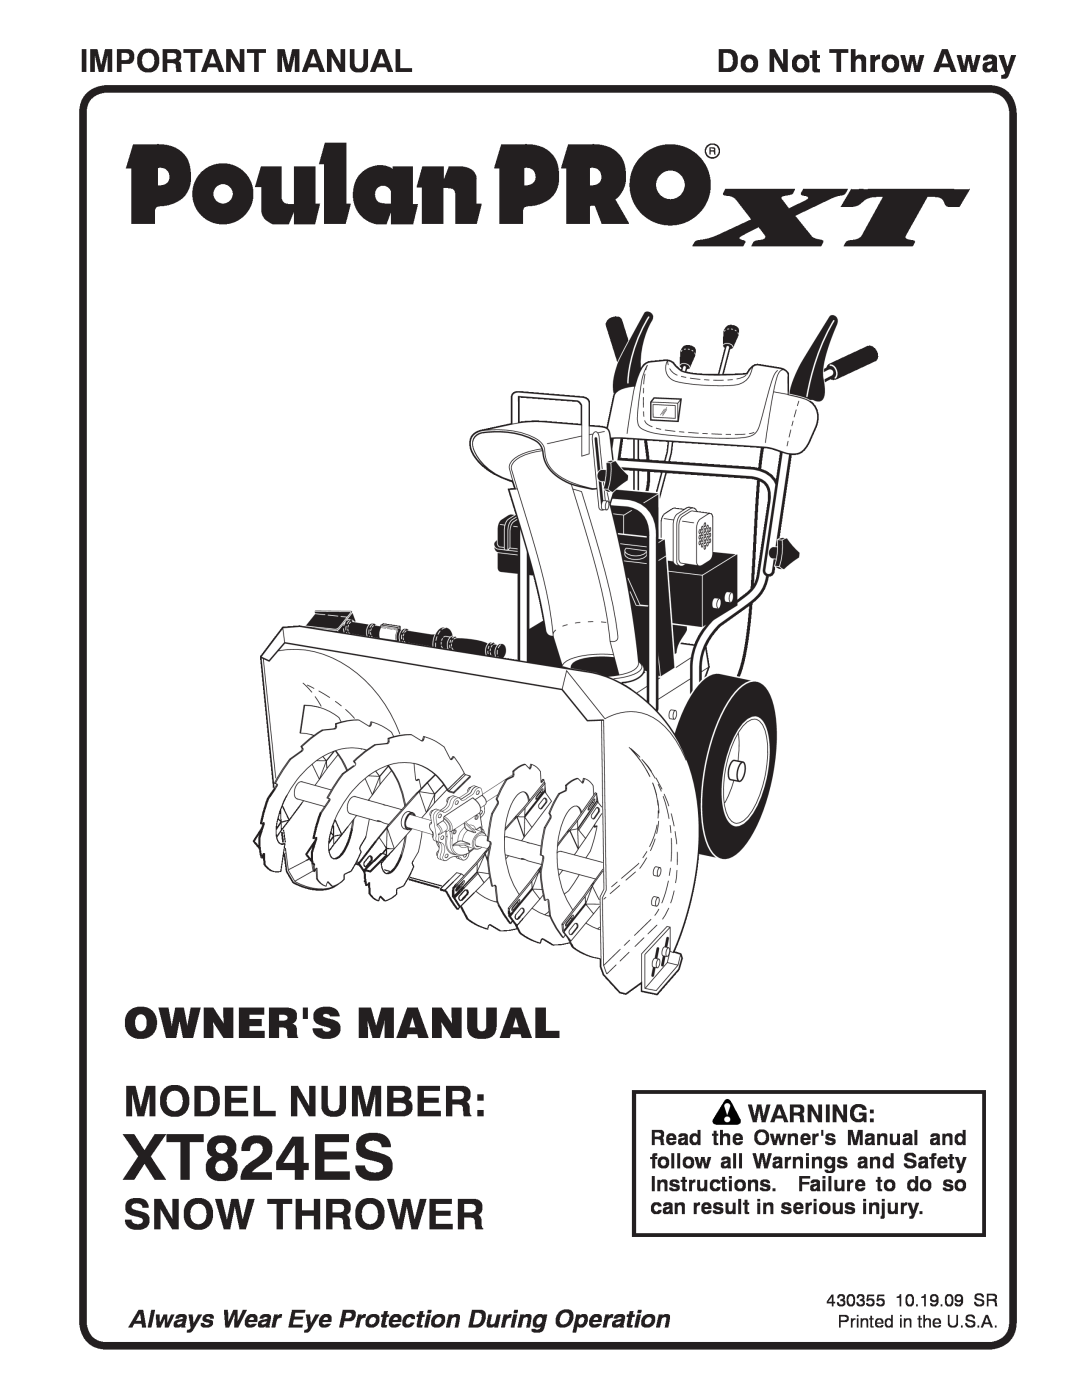 Poulan 96192003302 owner manual Owners Manual Model Number, Snow Thrower, Important Manual, XT824ES, Do Not Throw Away 